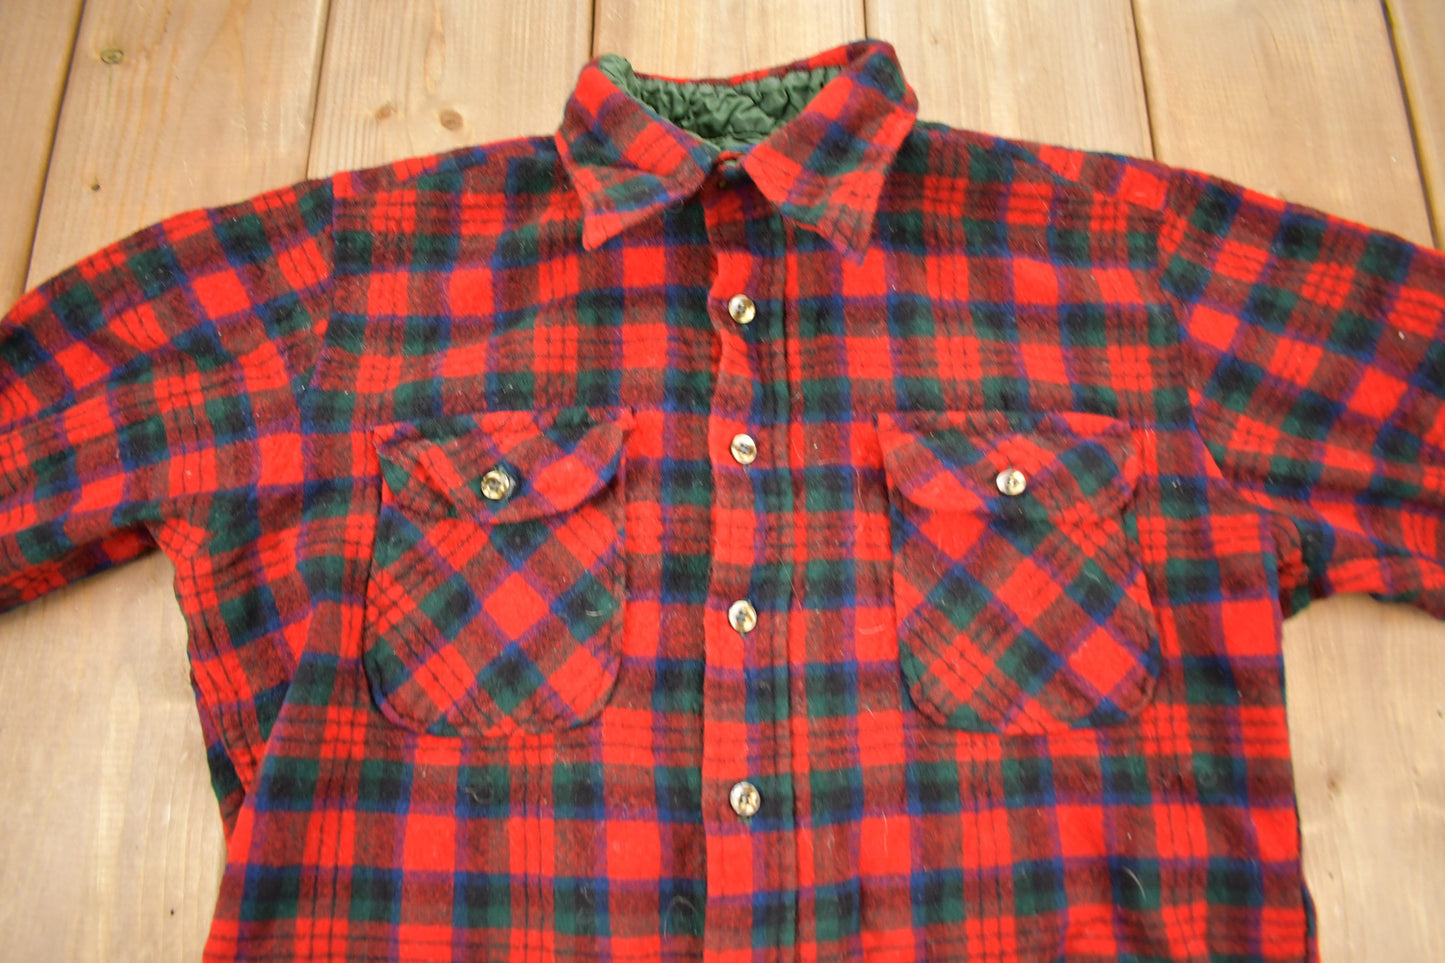 Vintage 1950s Pendleton Plaid Flannel Button Up Board Shirt / 100% Virgin Wool / Outdoorsman / Made In USA / True Vintage